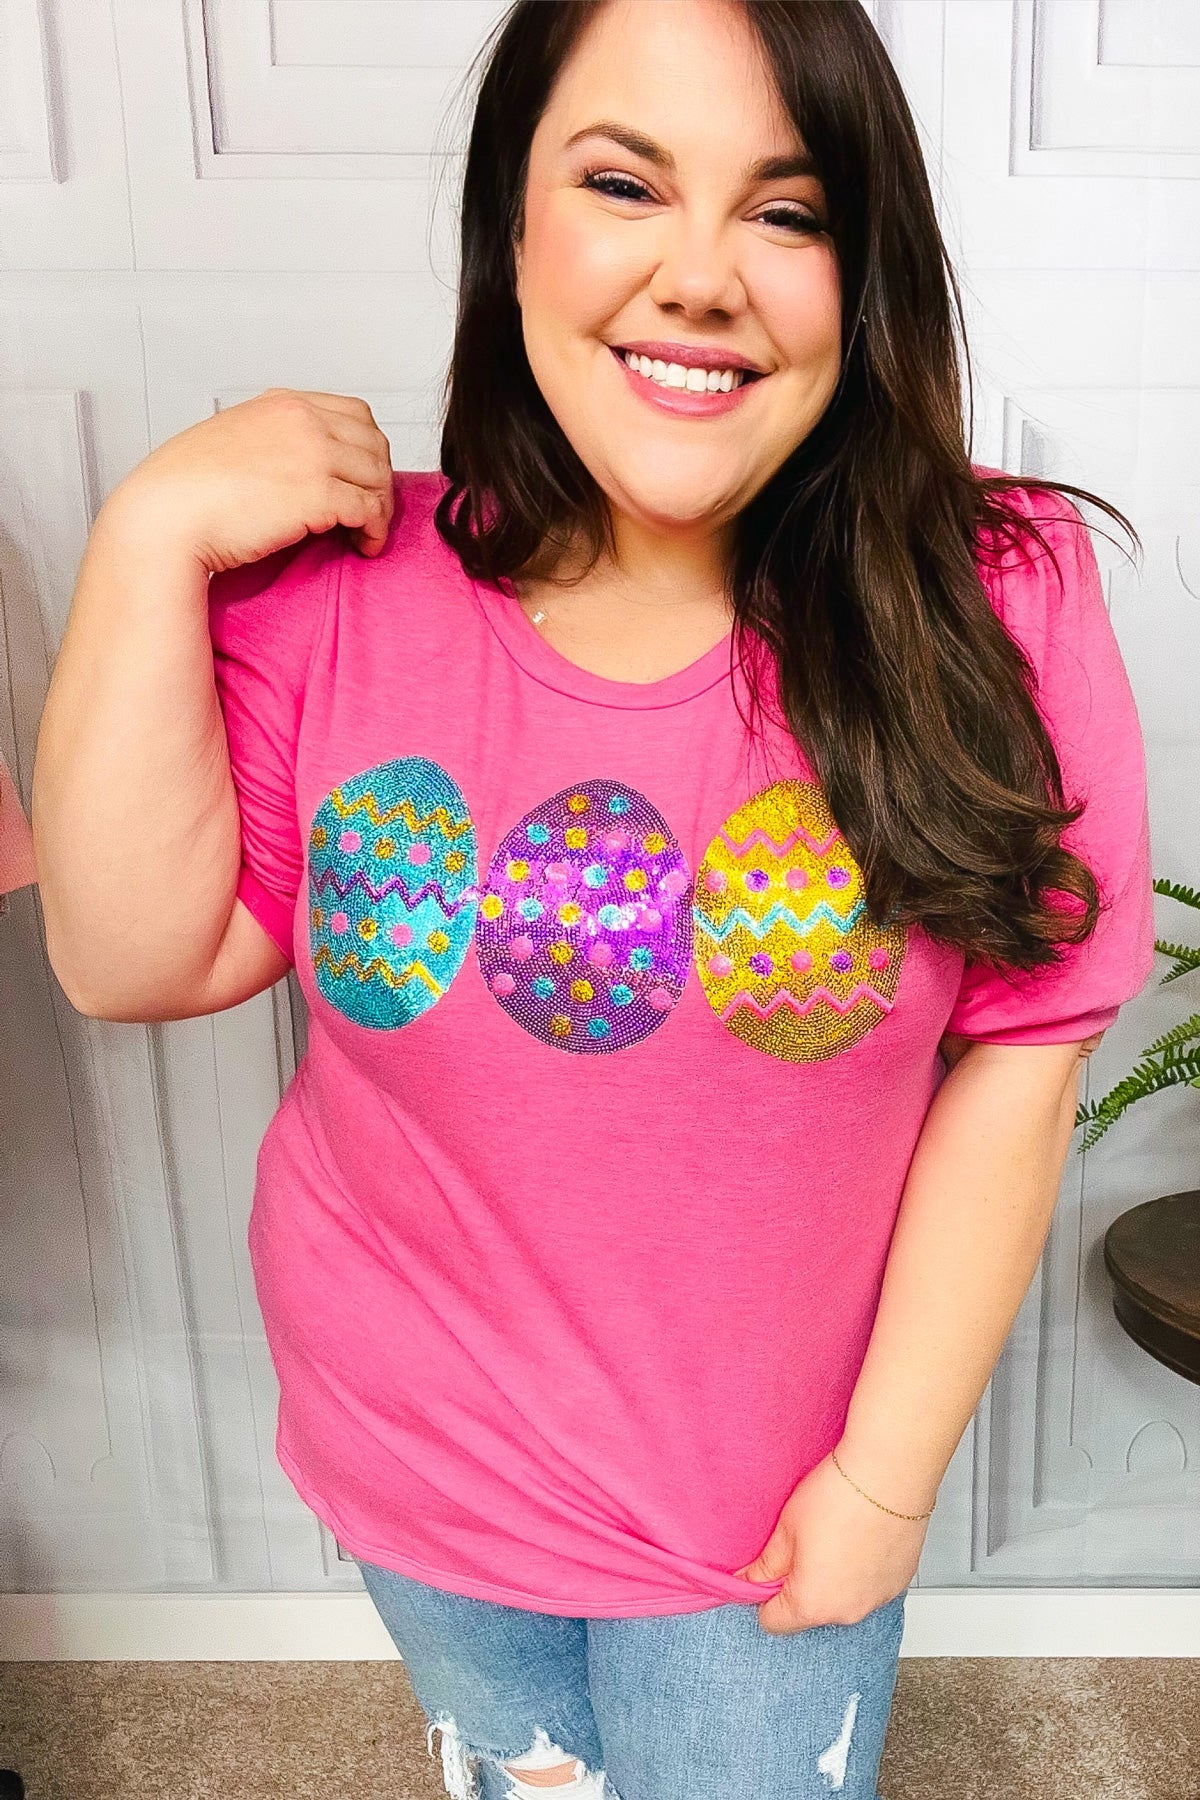 Turn Heads Sequin Easter Egg Terry Top in Hot Pink